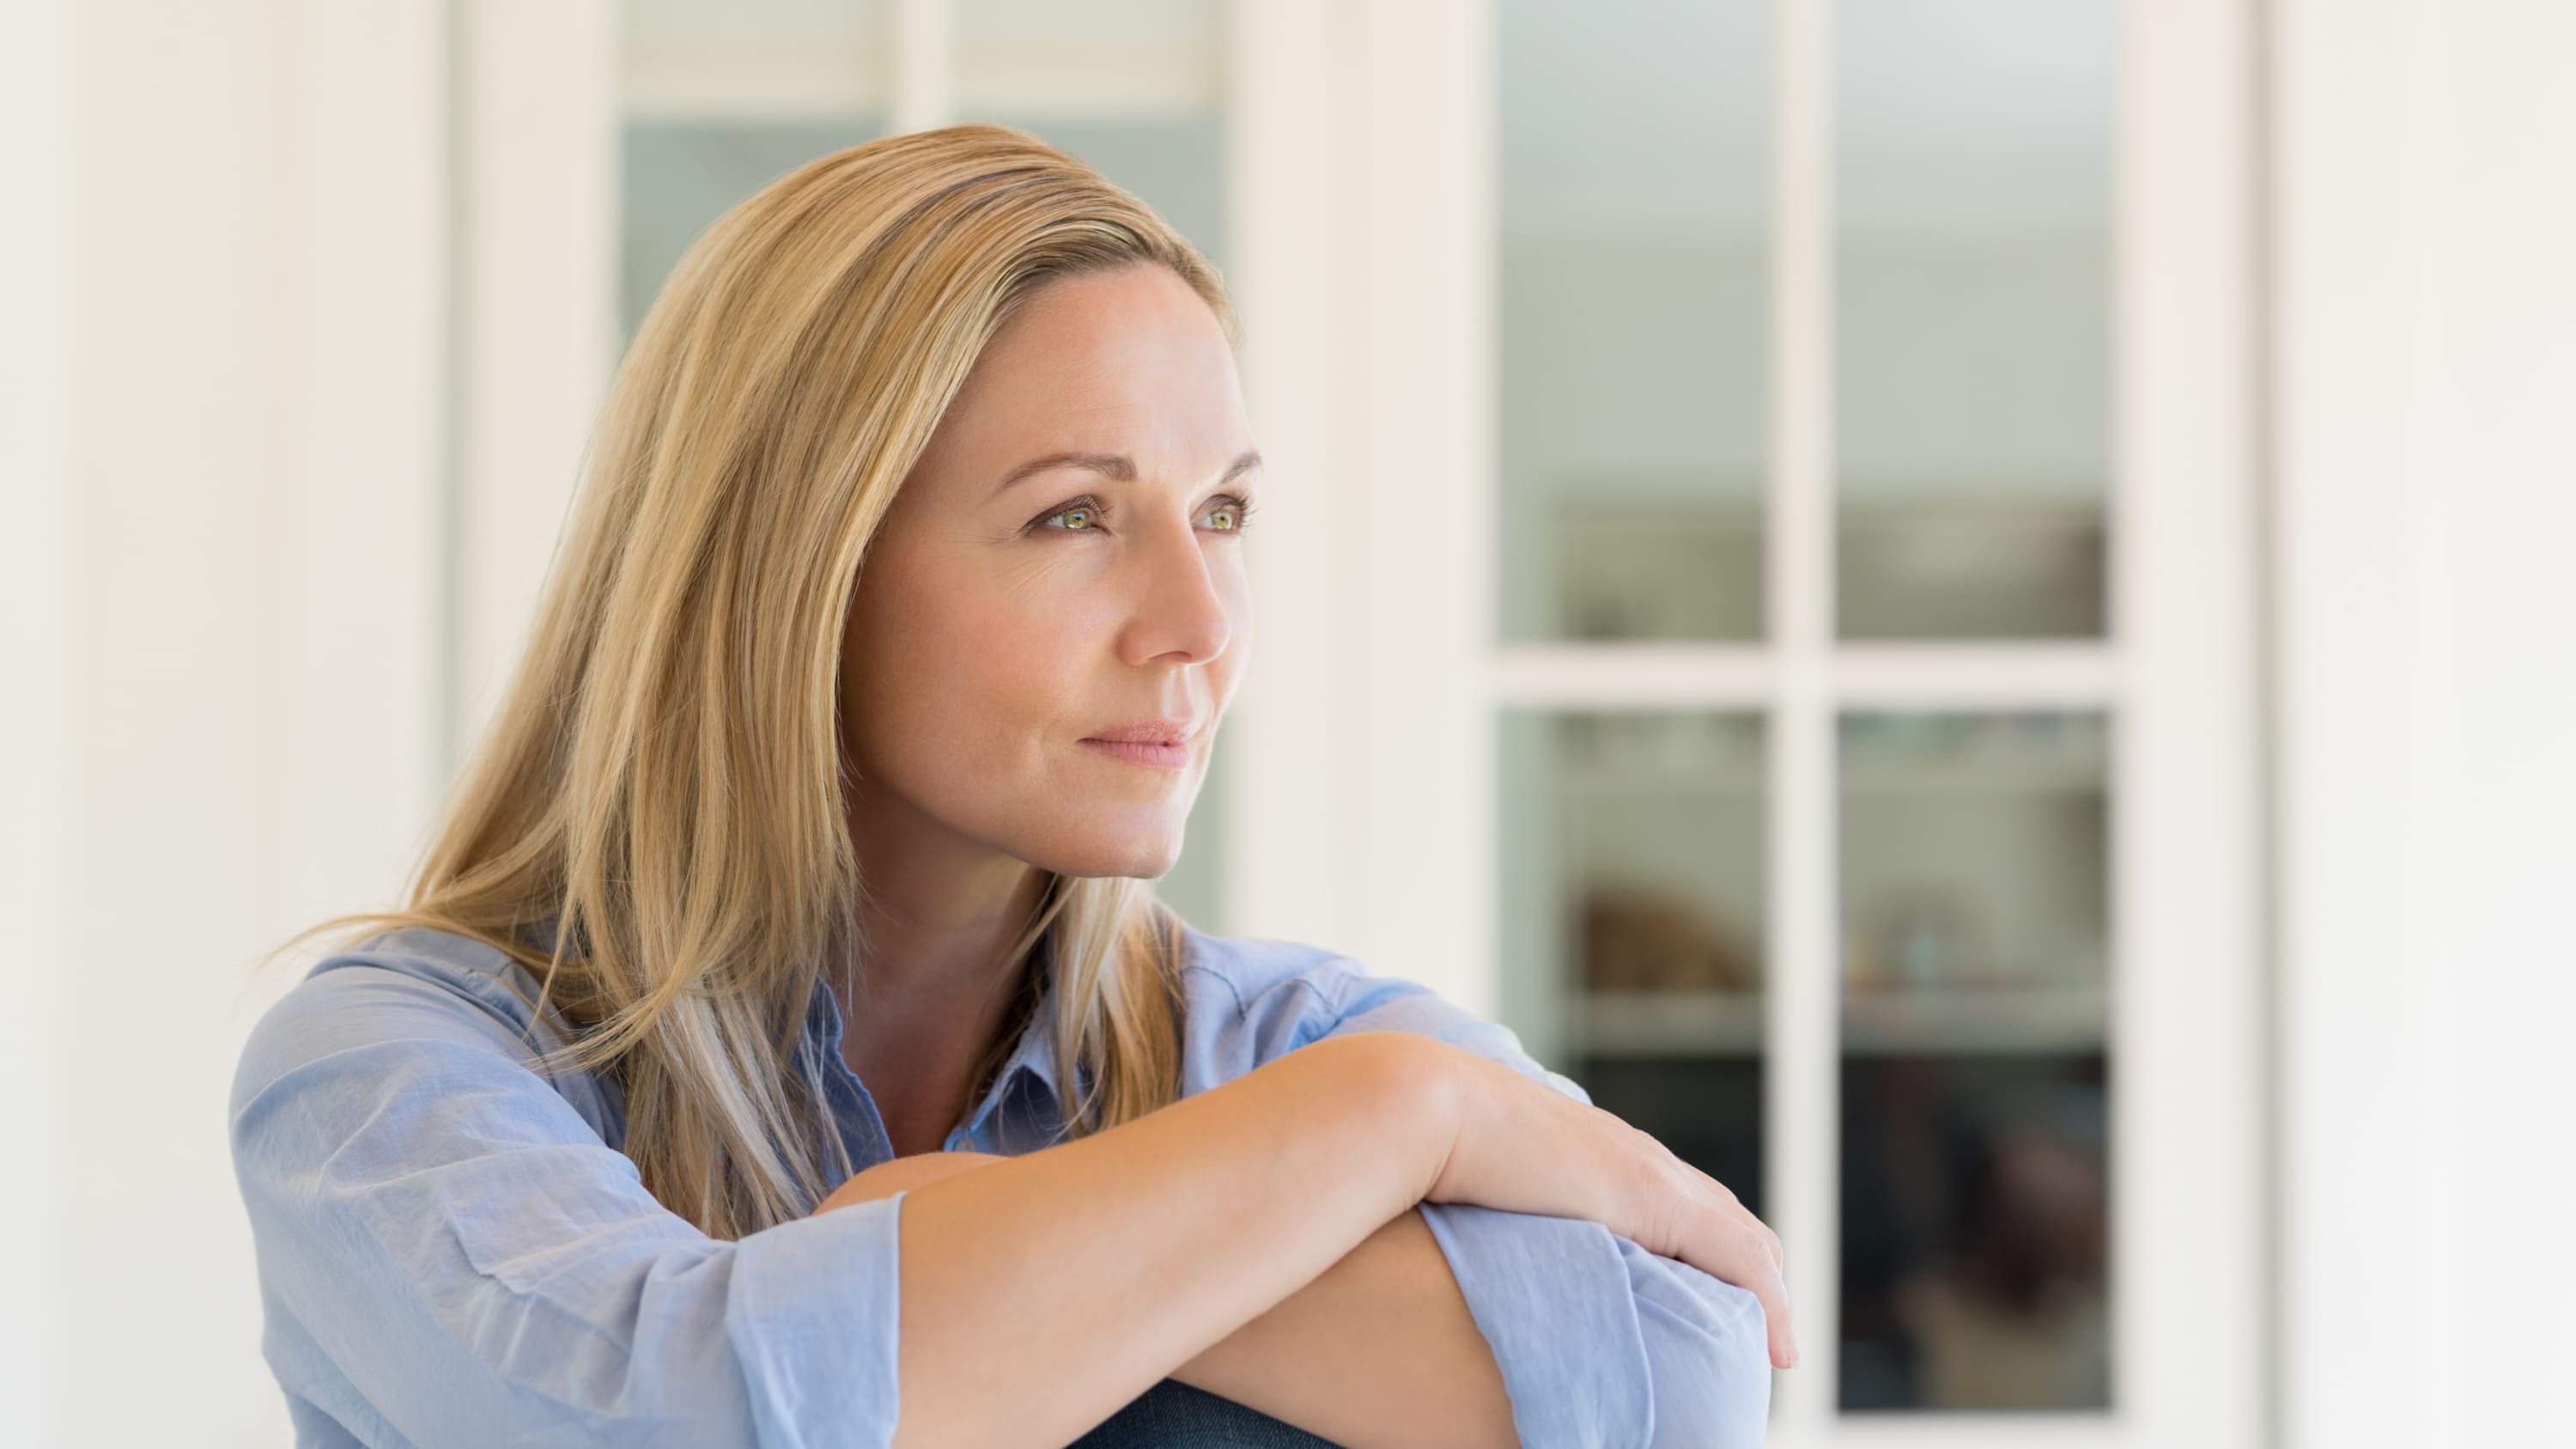 A woman is deep in thought, possibly thinking about neurogenic bladder